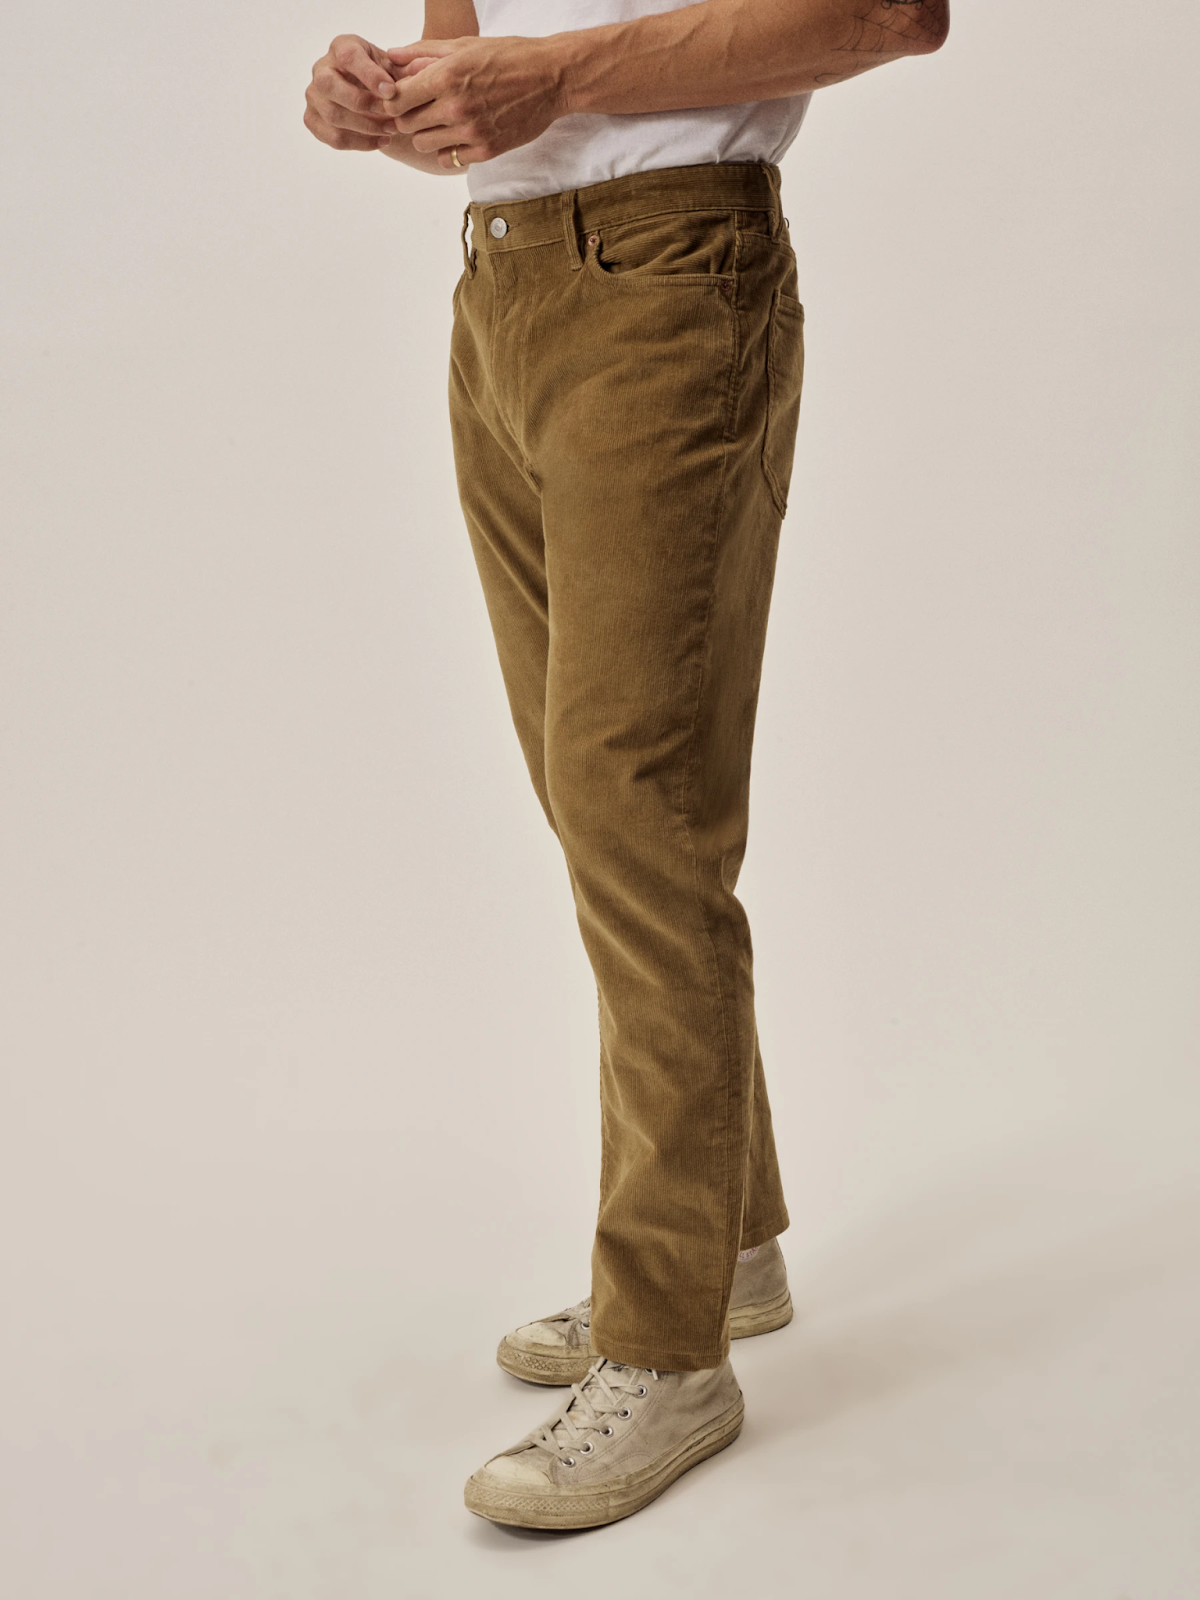 The Casual Man S Tweed Corduroy Is One Of The Best Things You Can Do With Your Fall Style How